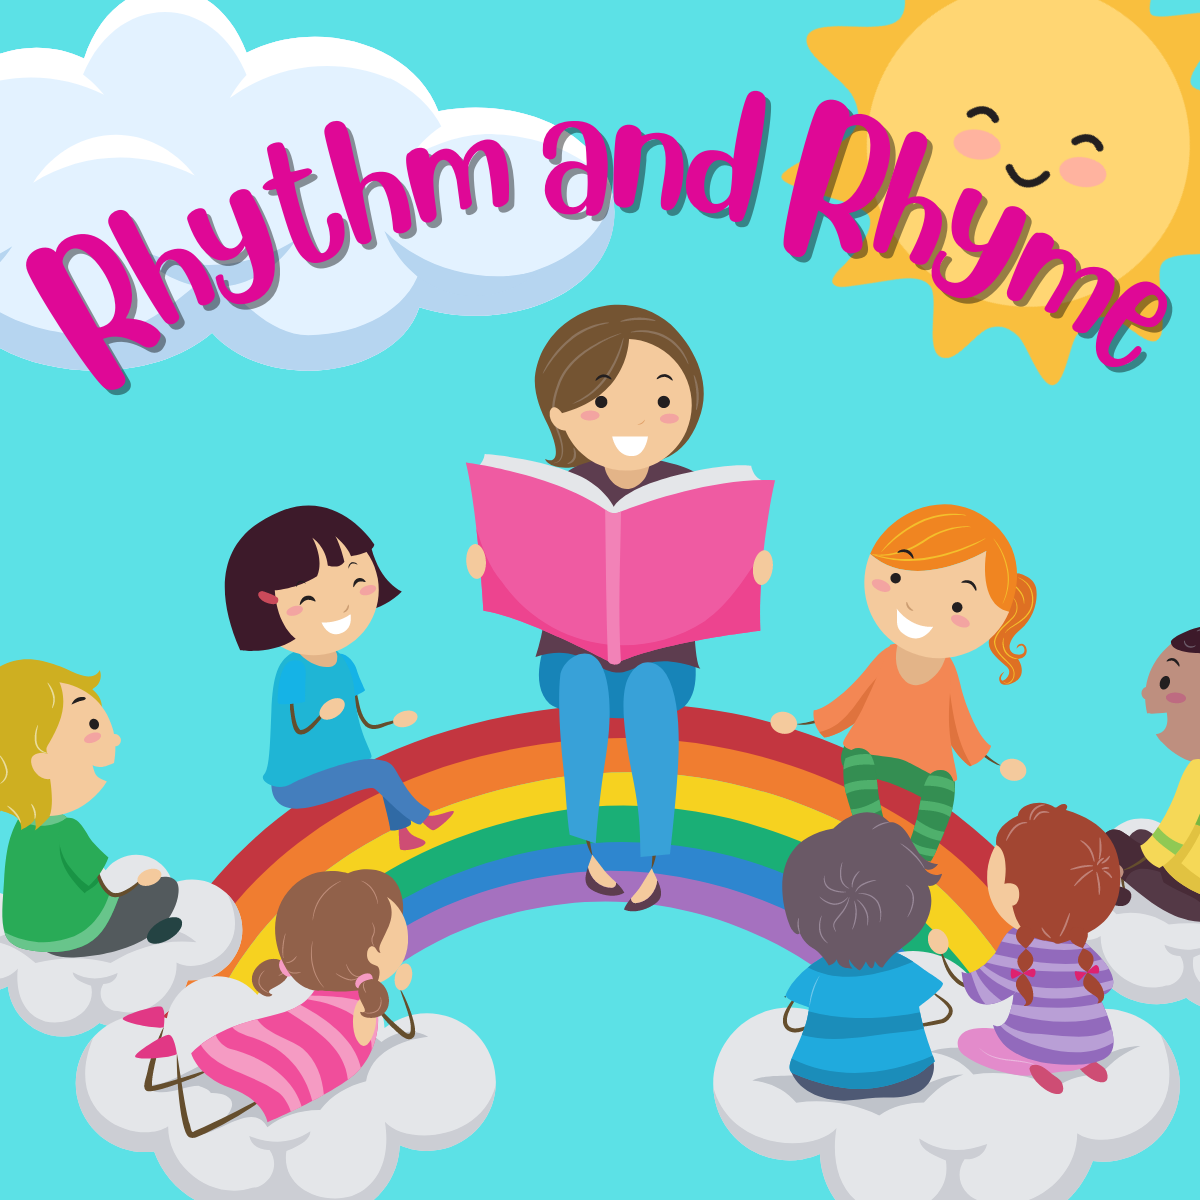 blue background, pink letters say rhythm and rhyme. image in the center is an adult reading to a circle of 7 kids sitting on clouds and rainbow